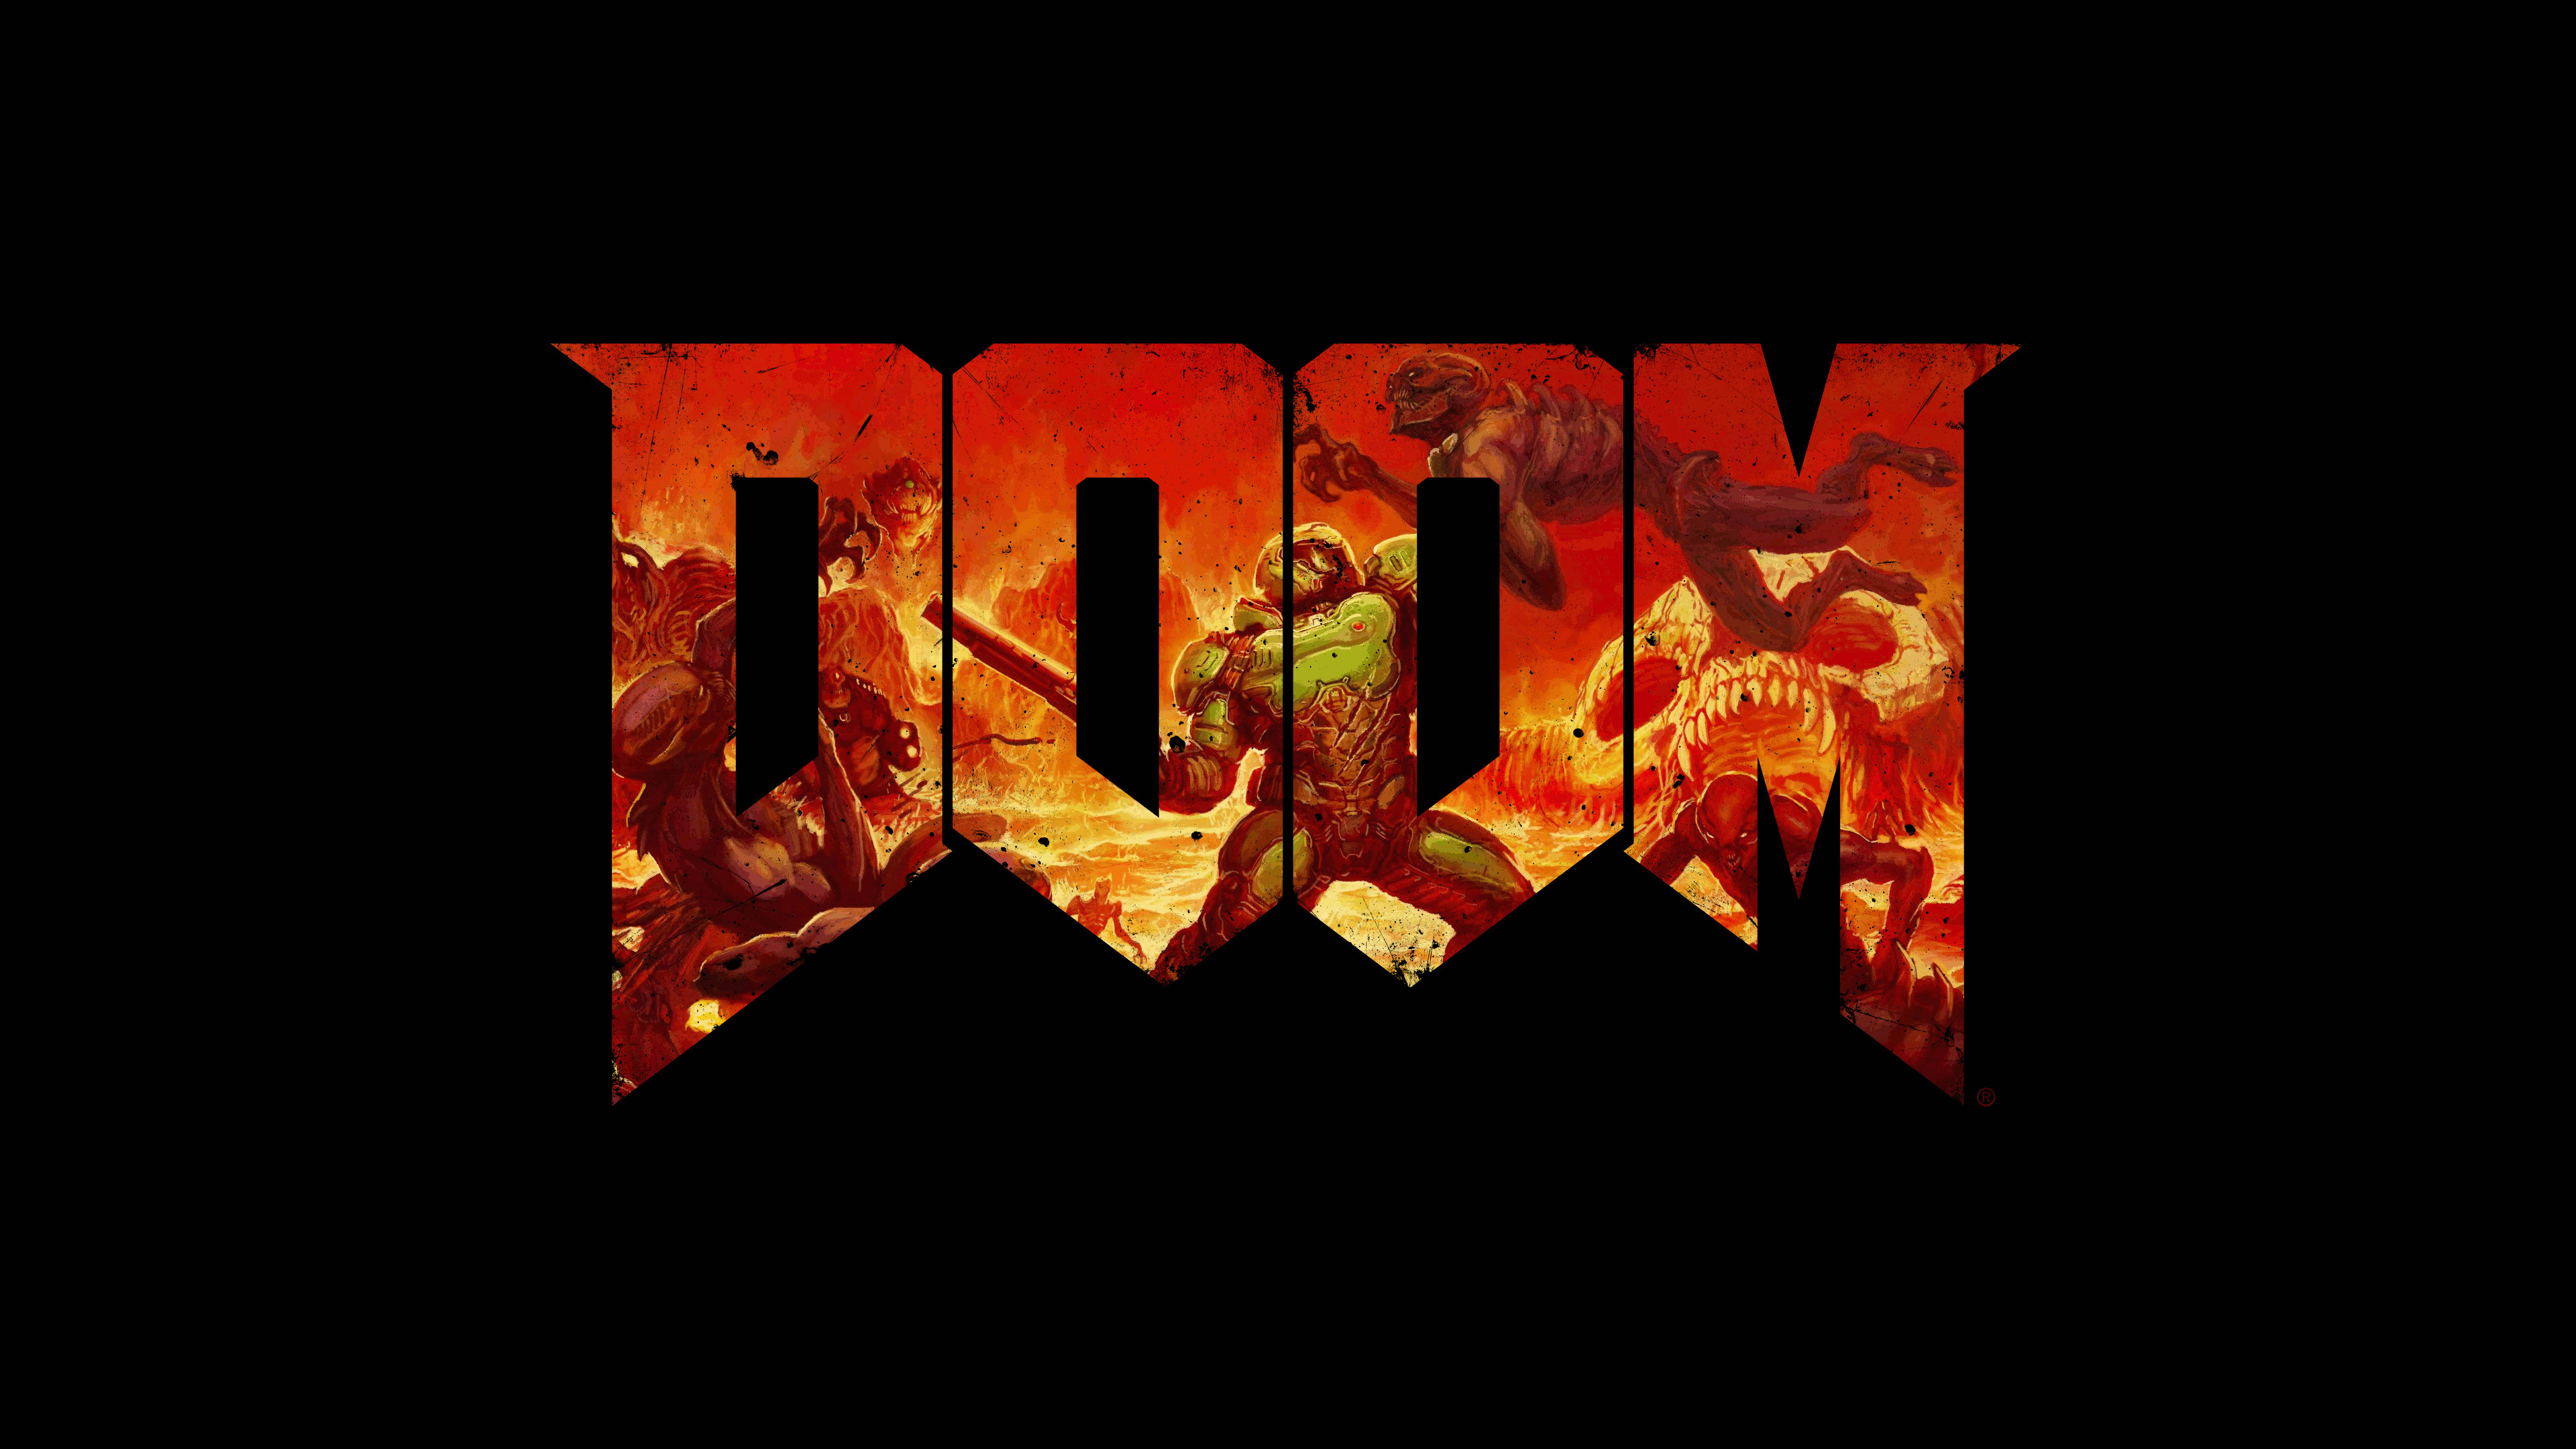 3840x2160 4k doom wallpapers white and black